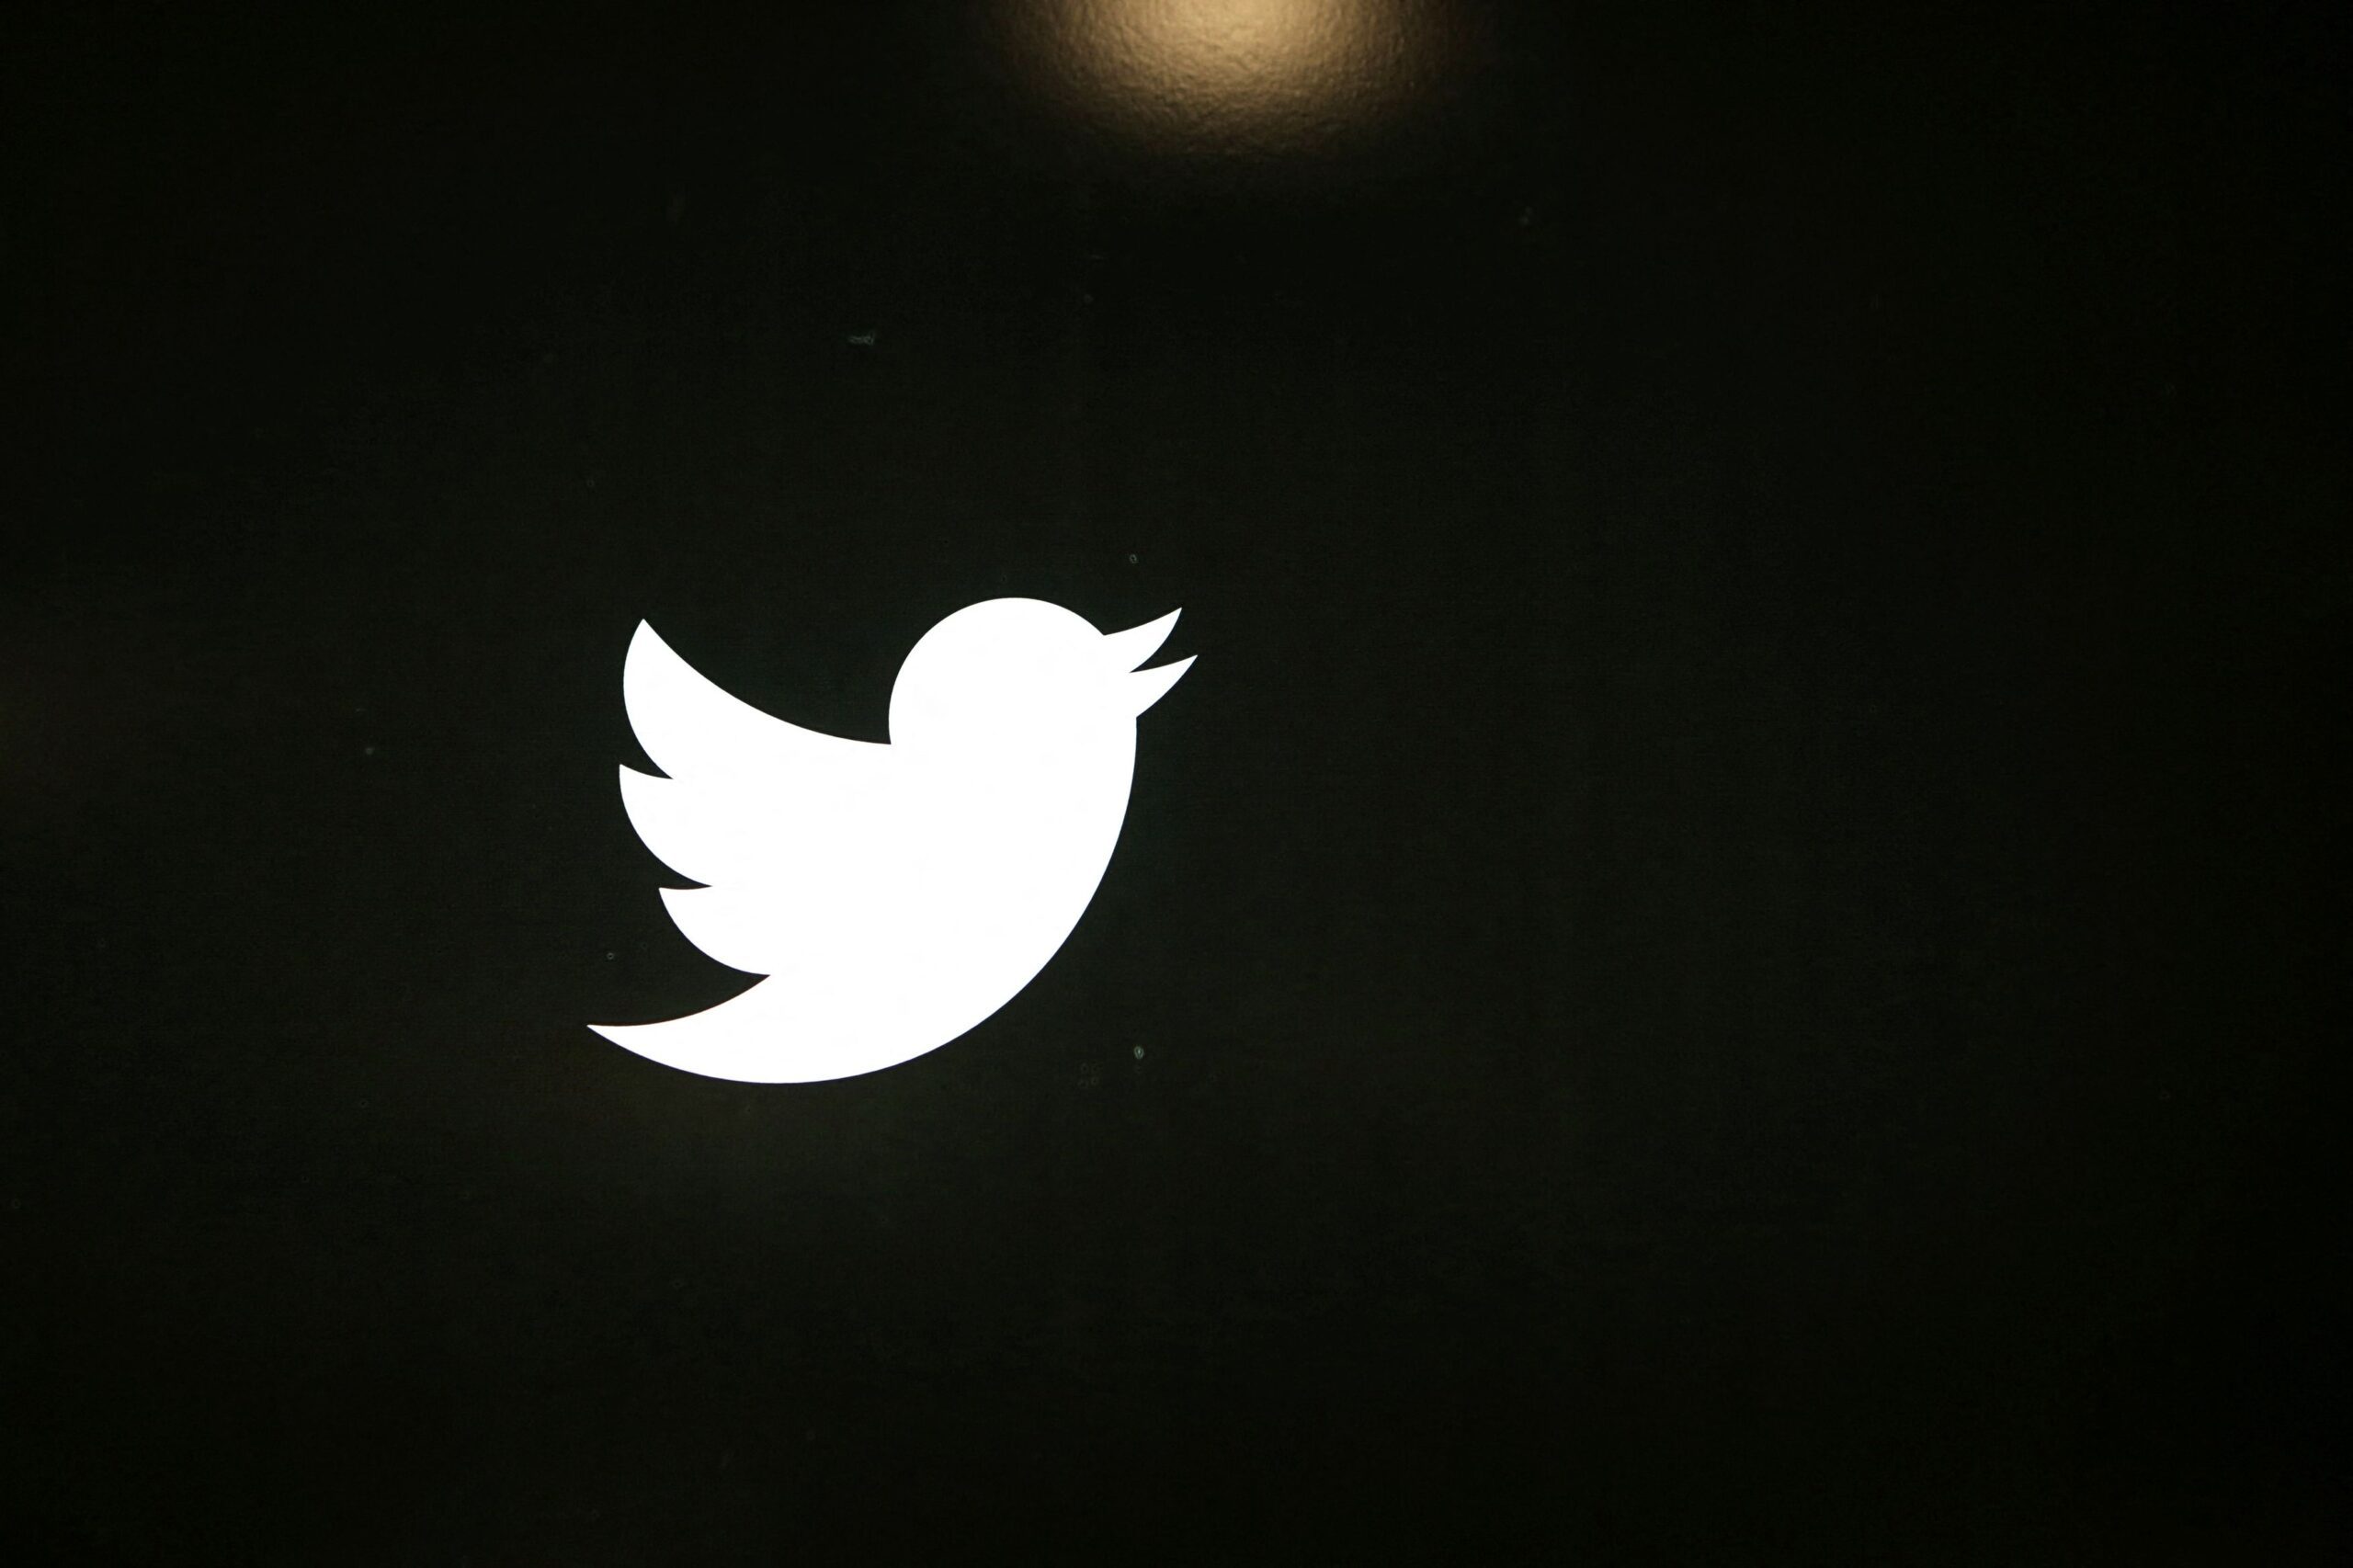 Twitter seeks judicial review of Indian orders to take down content – source